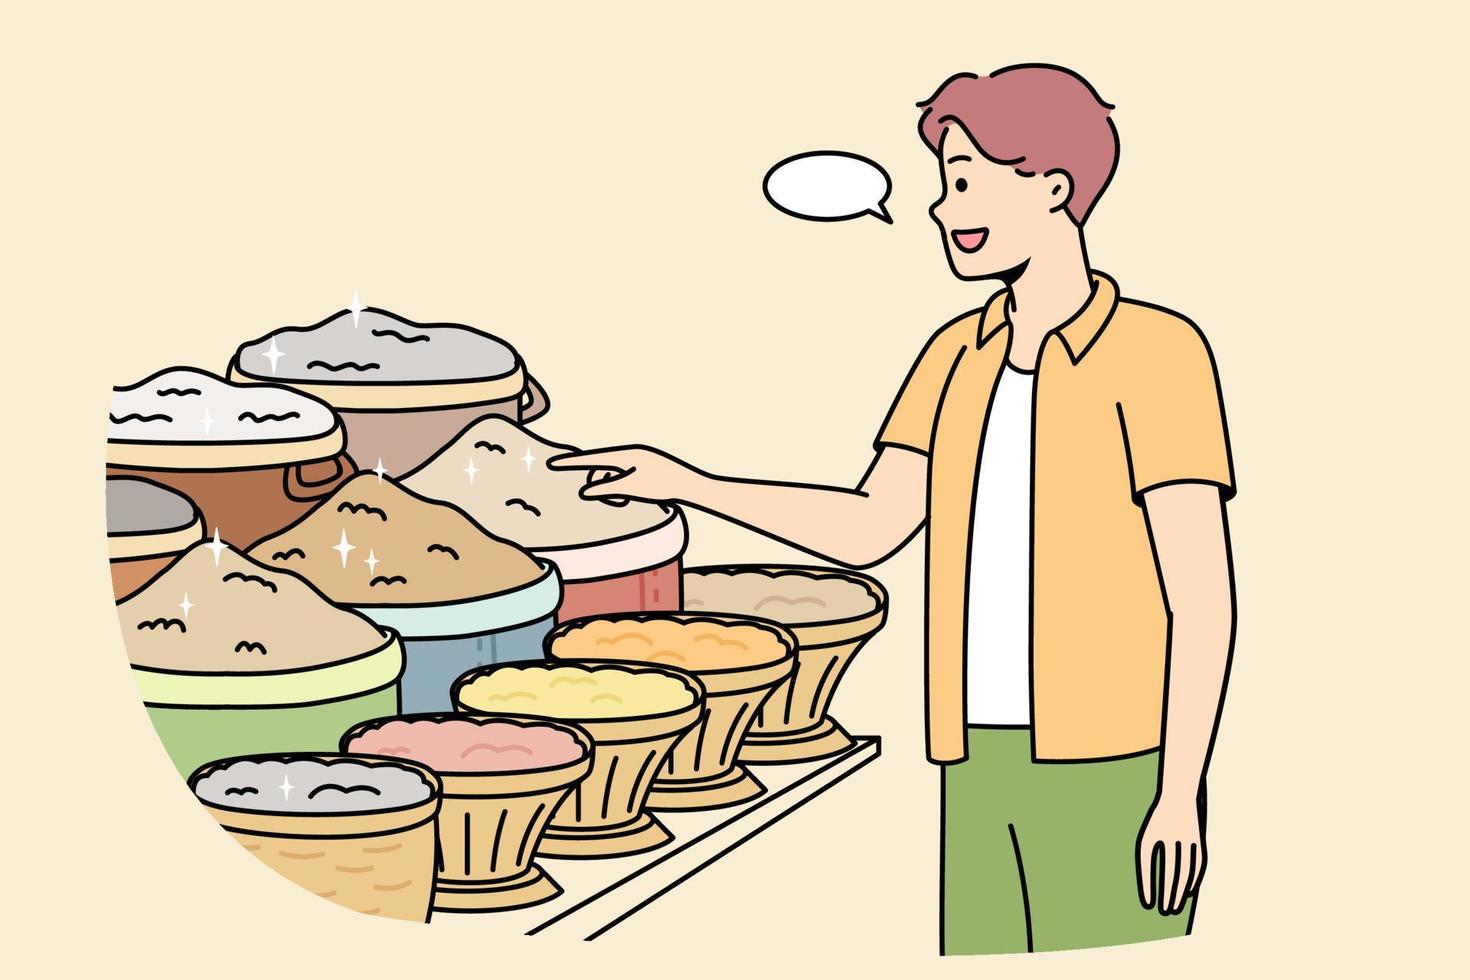 Man at grocery market asks price of condiments. Male buyer chooses ingredients for lunch. Guy wants to buy grits, cereals for home cooking. Food shopping. Vector linear colored illustration.